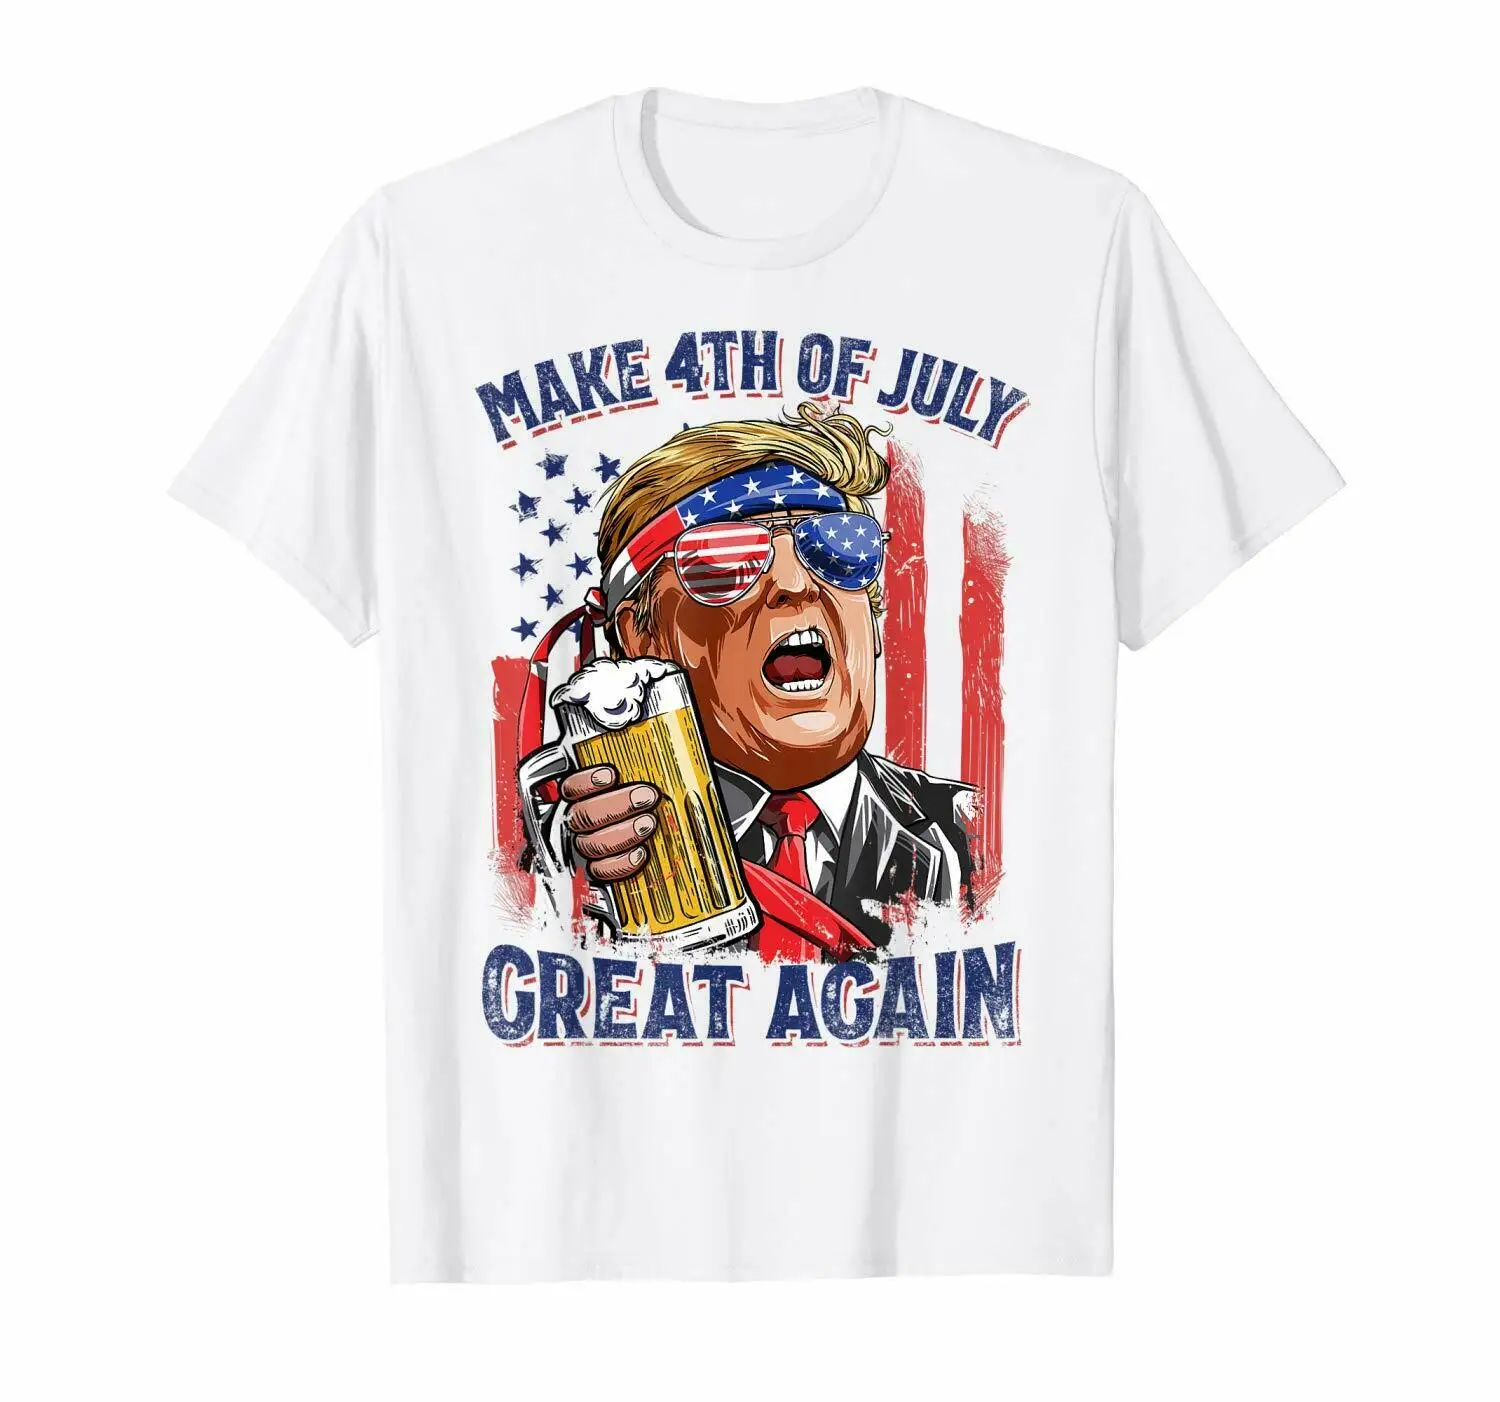 

Make 4th Of July Great Again Funny Donald Trump Drinking Beer T-Shirt Summer Cotton Short Sleeve O-Neck Men's T Shirt New S-3XL